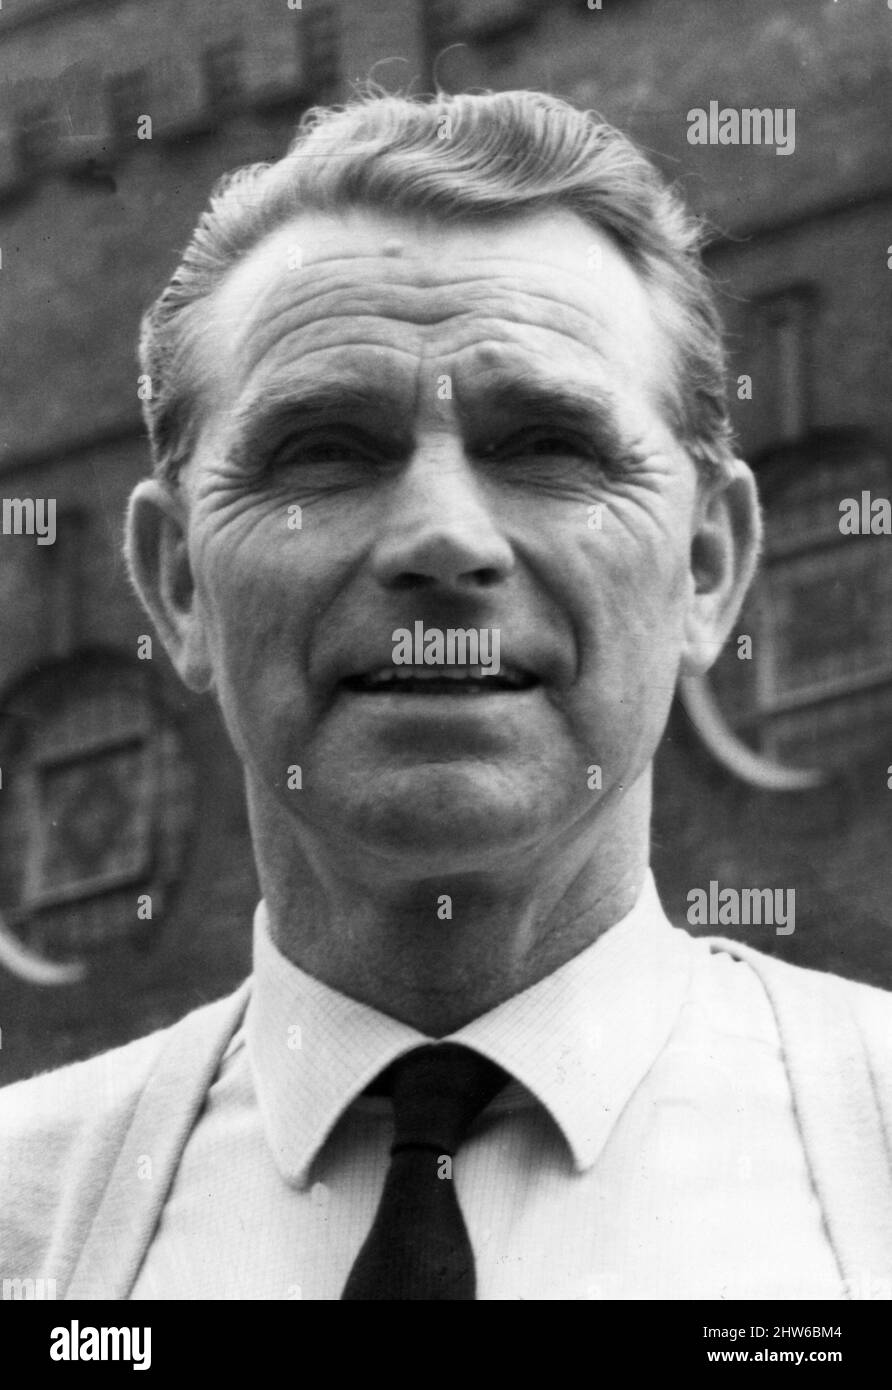 Peter Doherty one of the greatest inside forwards in football and now chief scout for Aston Villa football club, pictured July 1968. Stock Photo